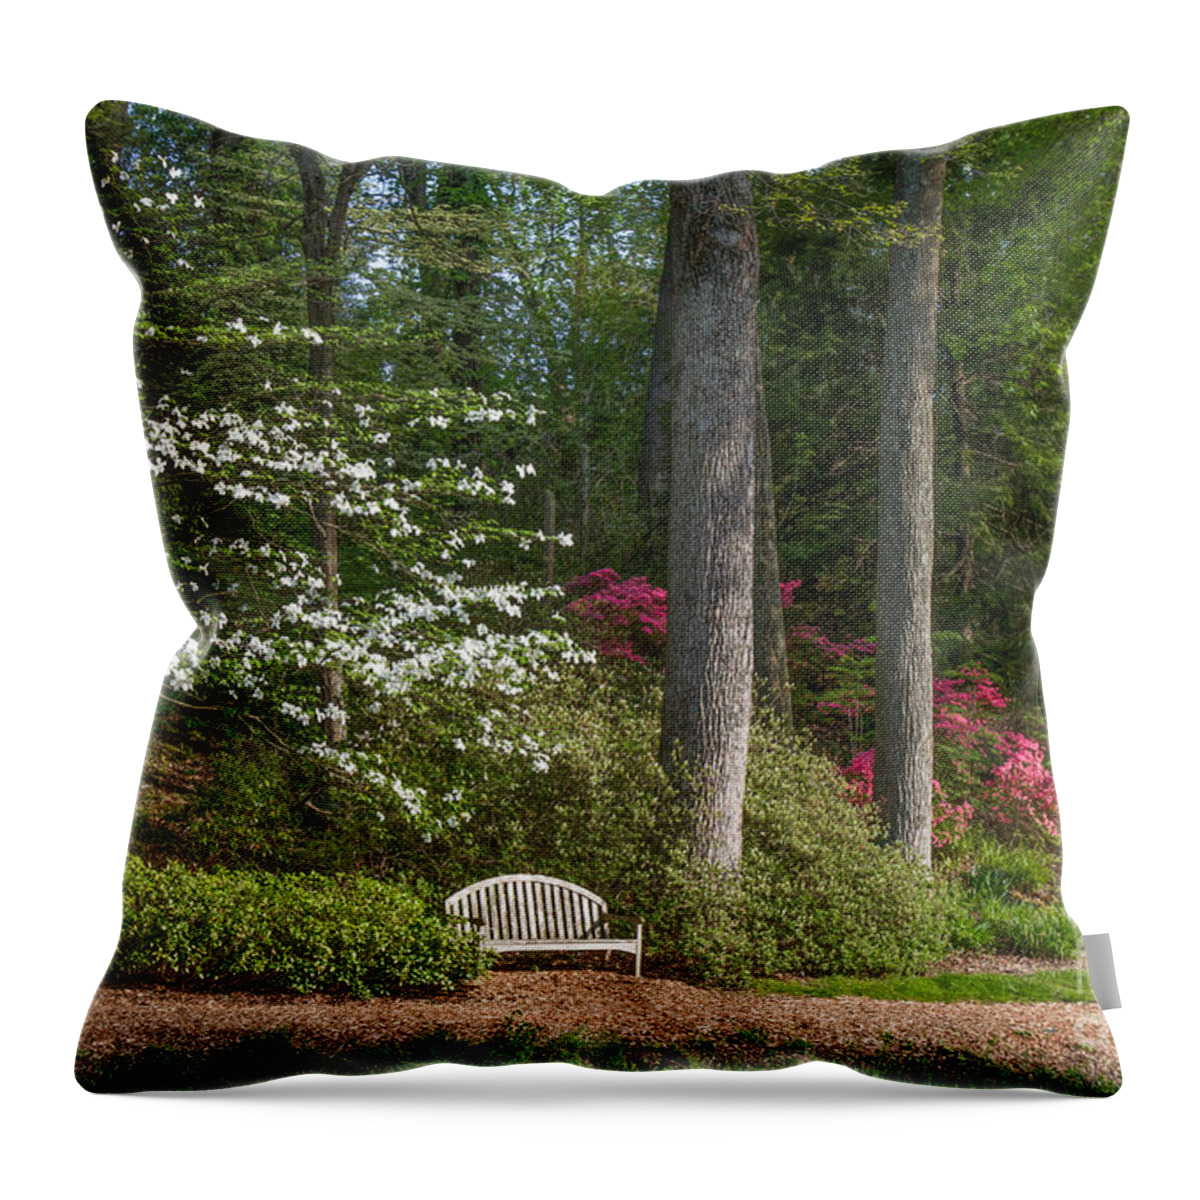 Spring Landscapes Throw Pillow featuring the photograph Brookside Gardens 7 by Chris Scroggins